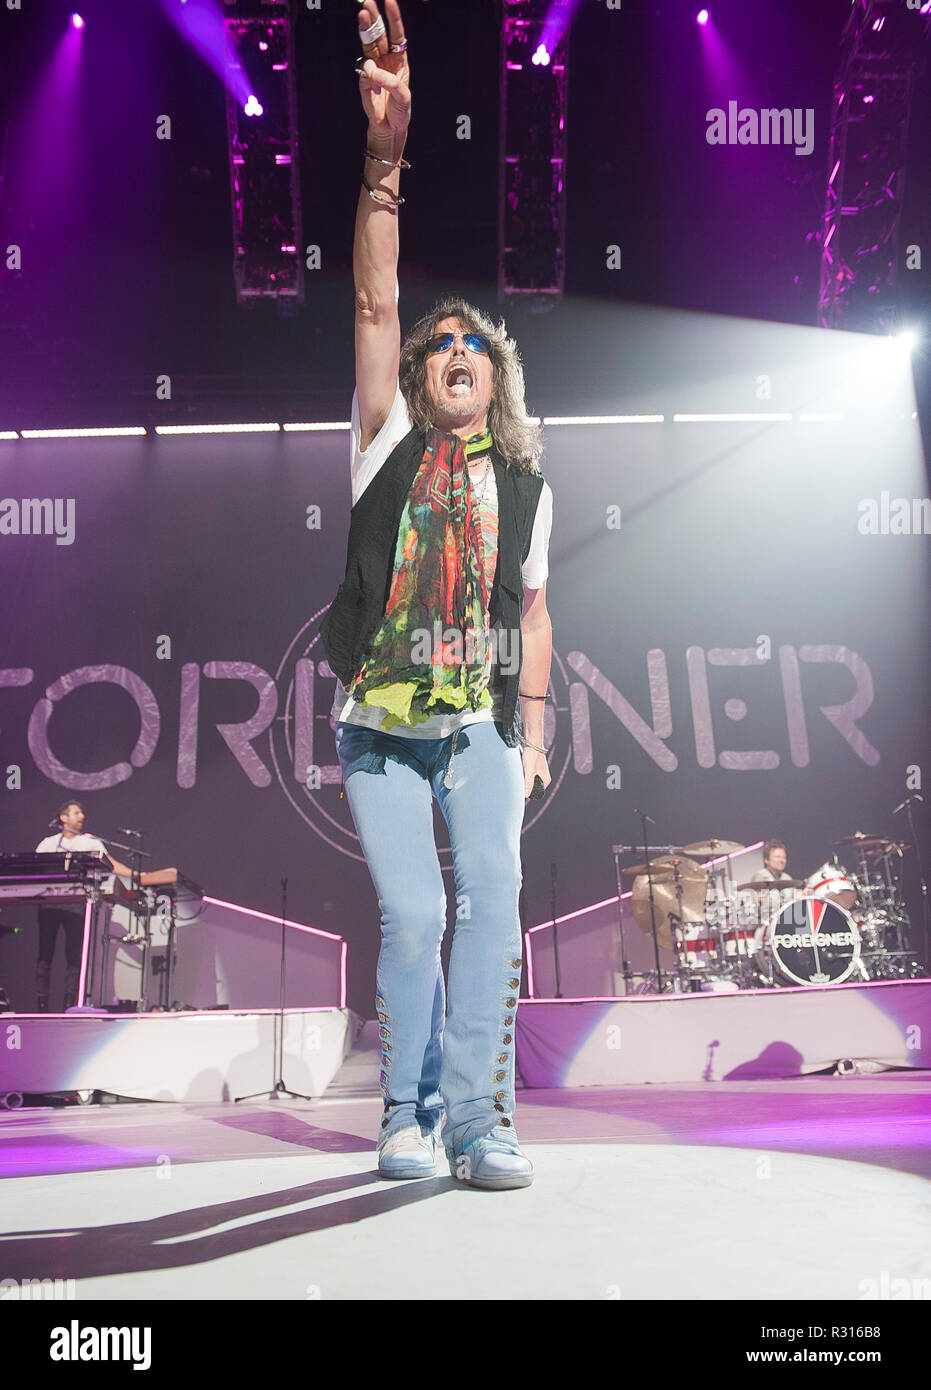 July 3, 2018 - Raleigh, North Carolina; USA - Singer KELLY HANSEN of the band FOREIGNER performs live as their 2018 tour makes a stop at the Coastal Credit Union Music Park at Walnut Creek located in Raleigh Copyright 2018 Jason Moore. Credit: Jason Moore/ZUMA Wire/Alamy Live News Stock Photo